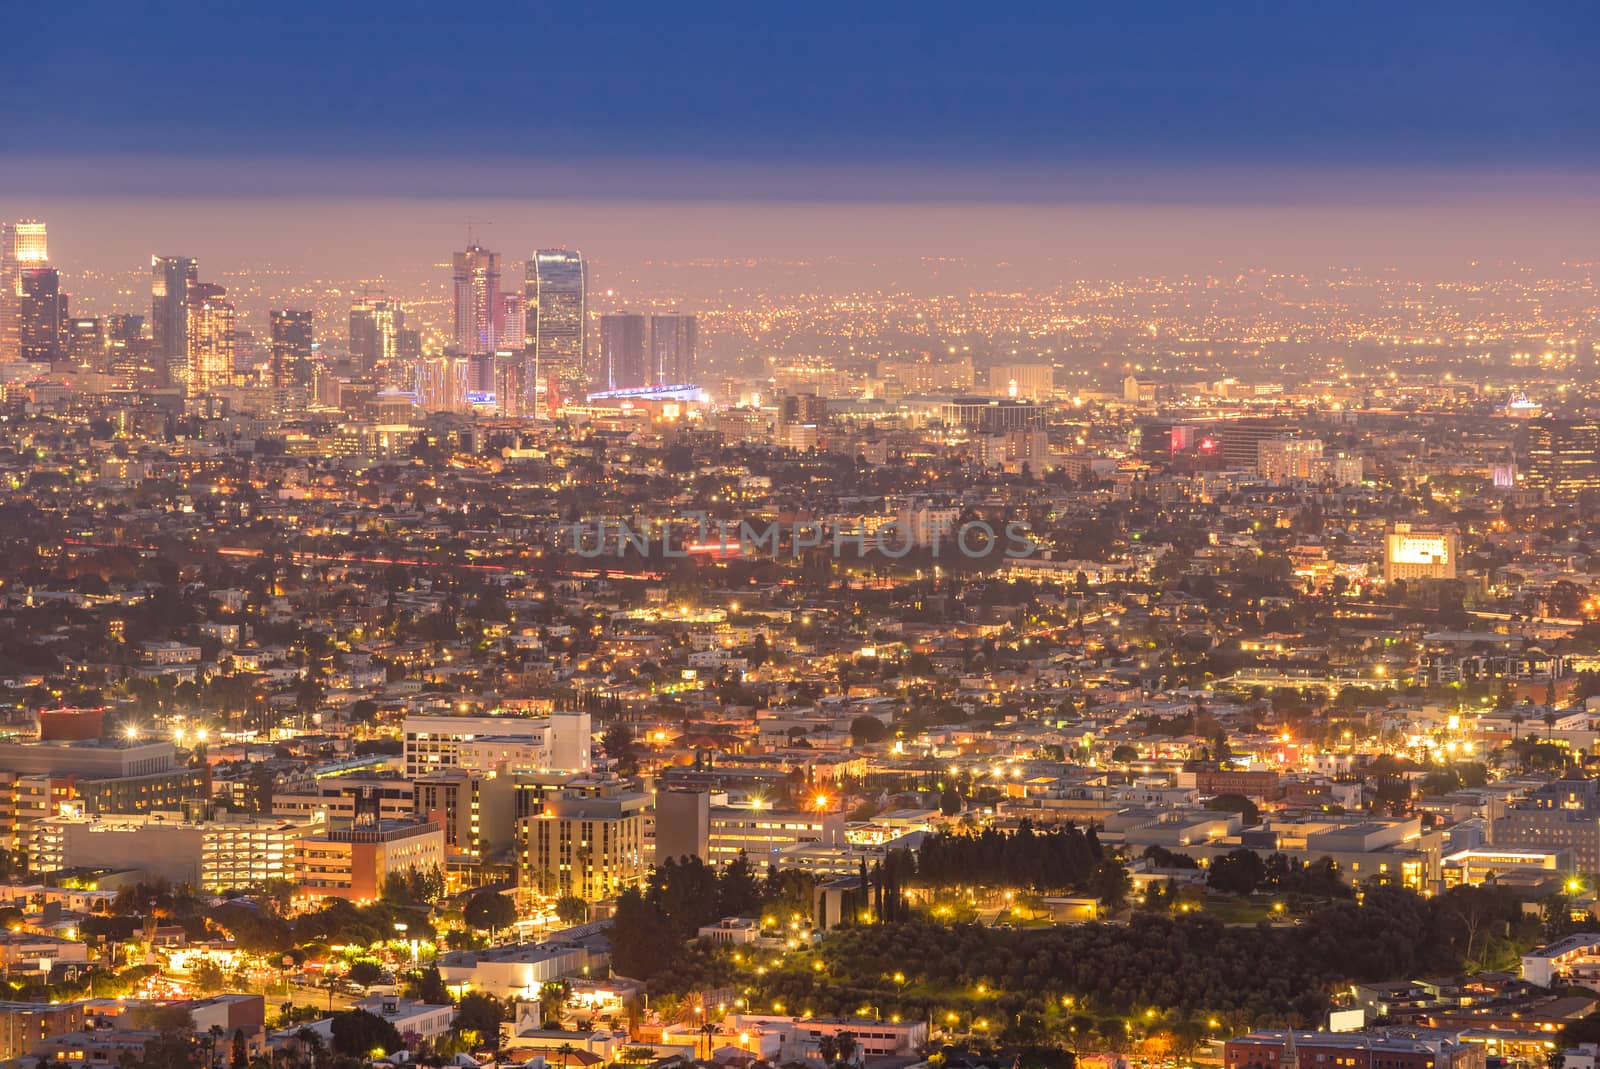 Los Angeles Downtown sunset aerial view, California, USA